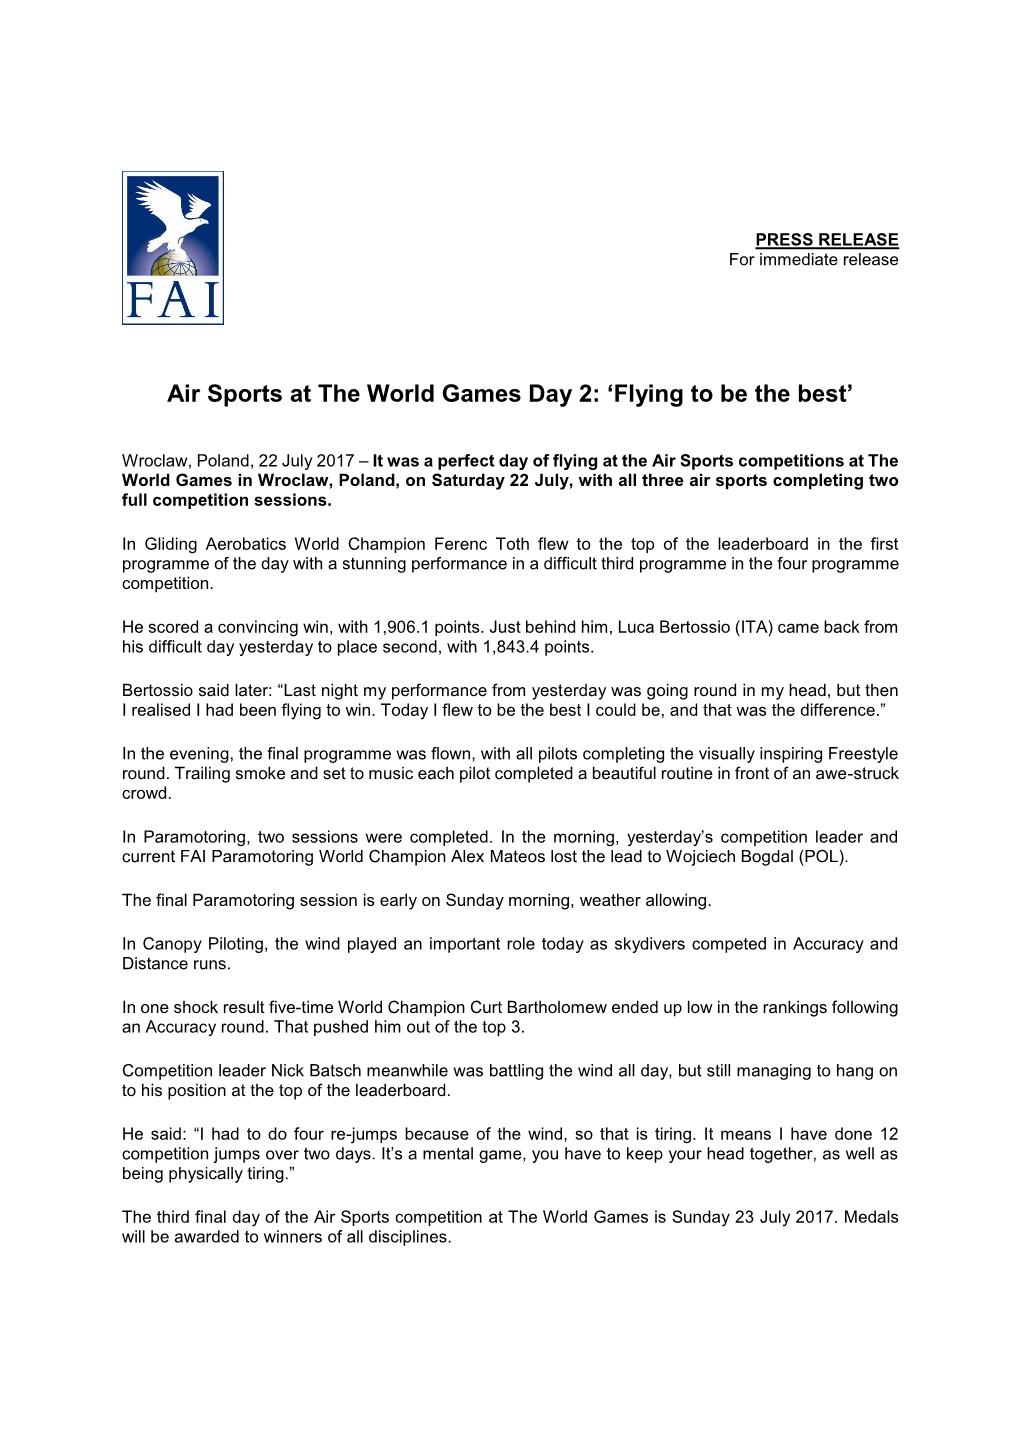 Air Sports at the World Games Day 2: 'Flying to Be the Best'